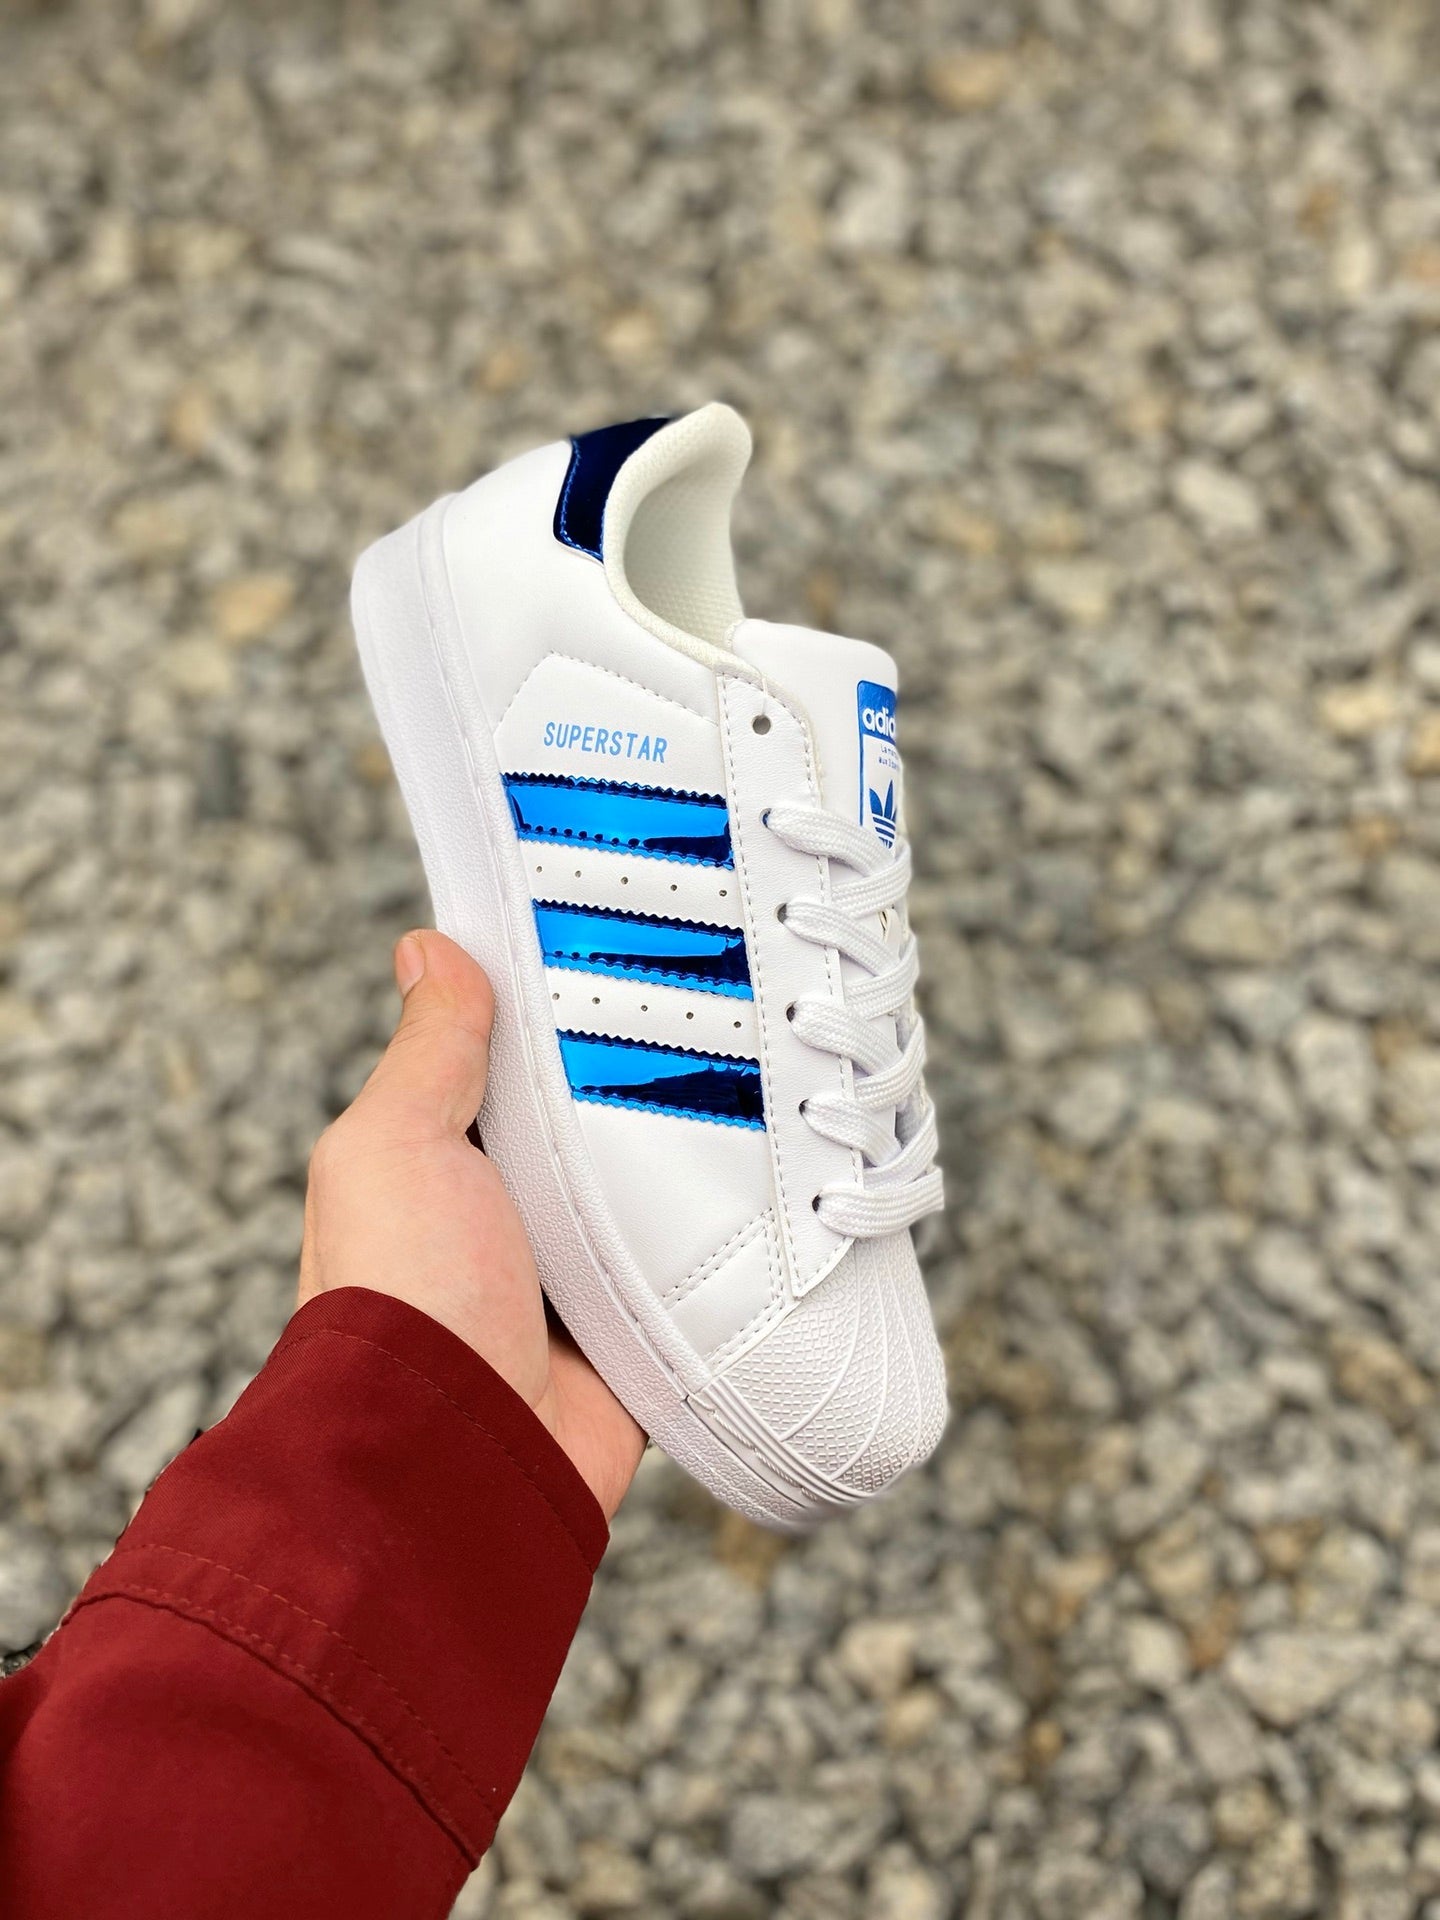 Adidas Superstar Blue Sneakers Shoes